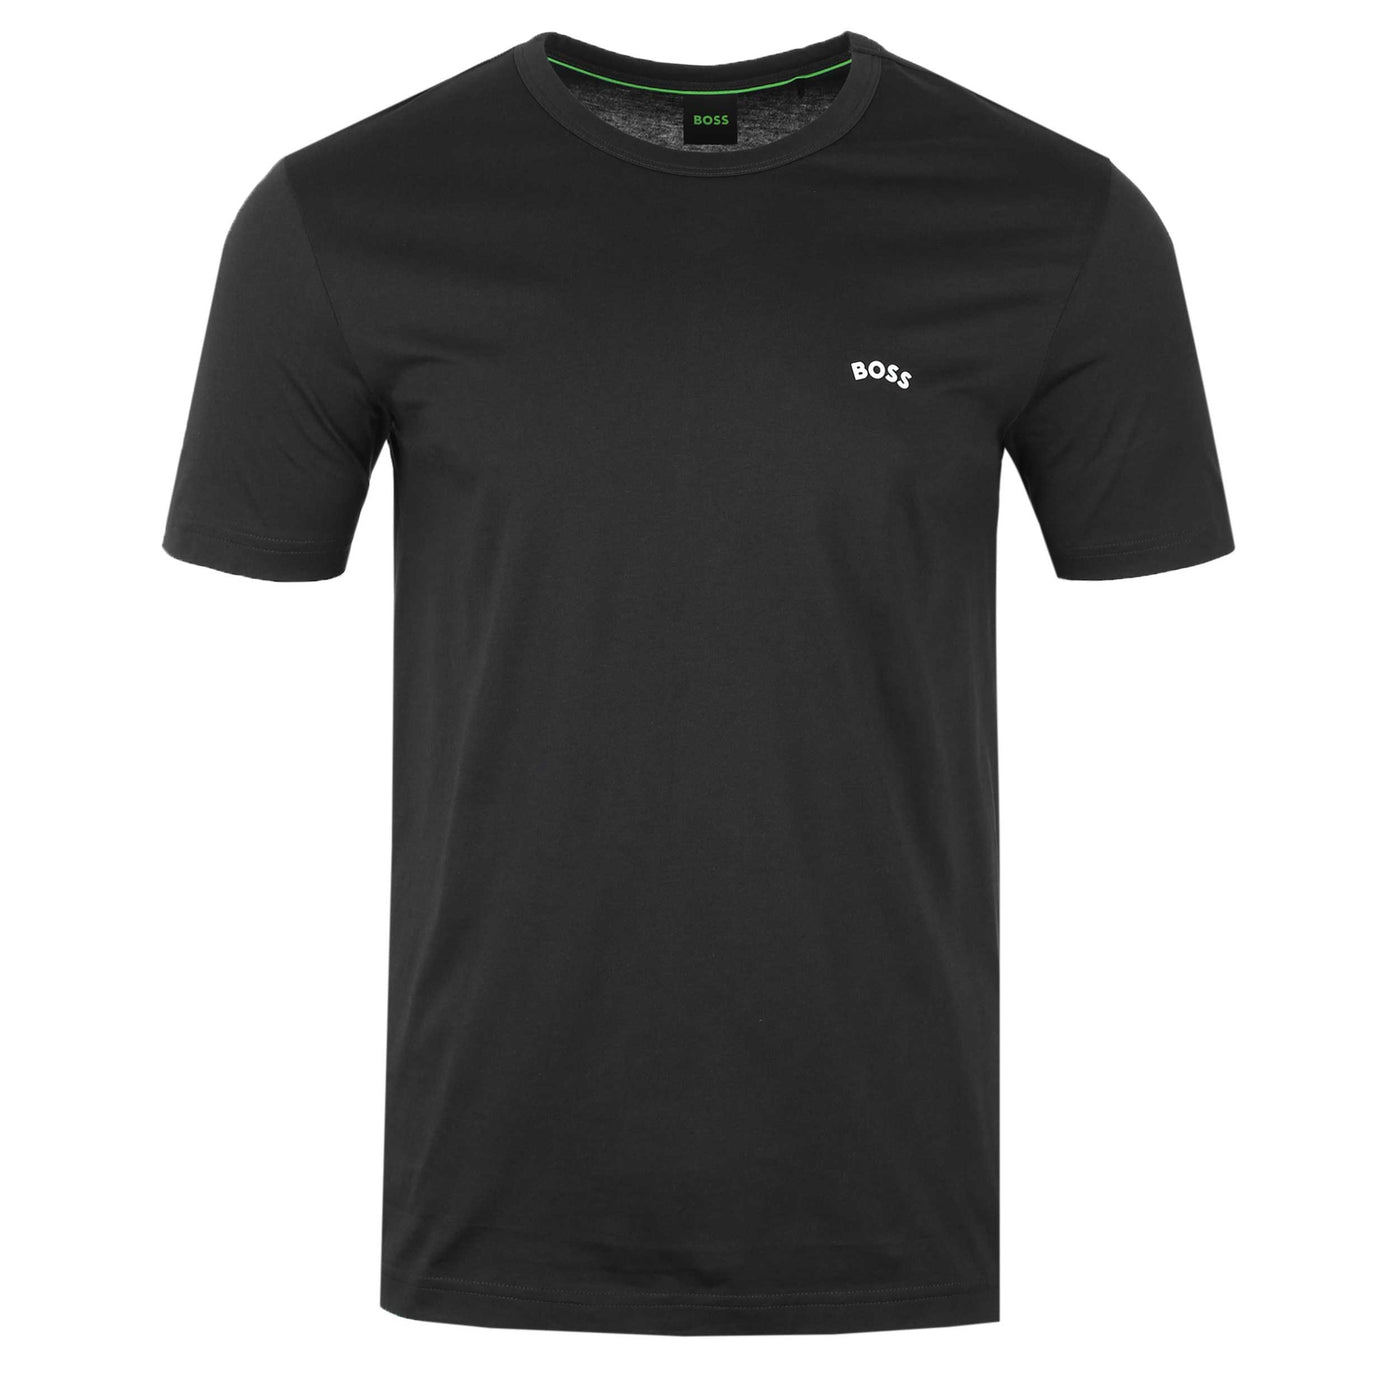 BOSS Tee Curved T-Shirt in Black